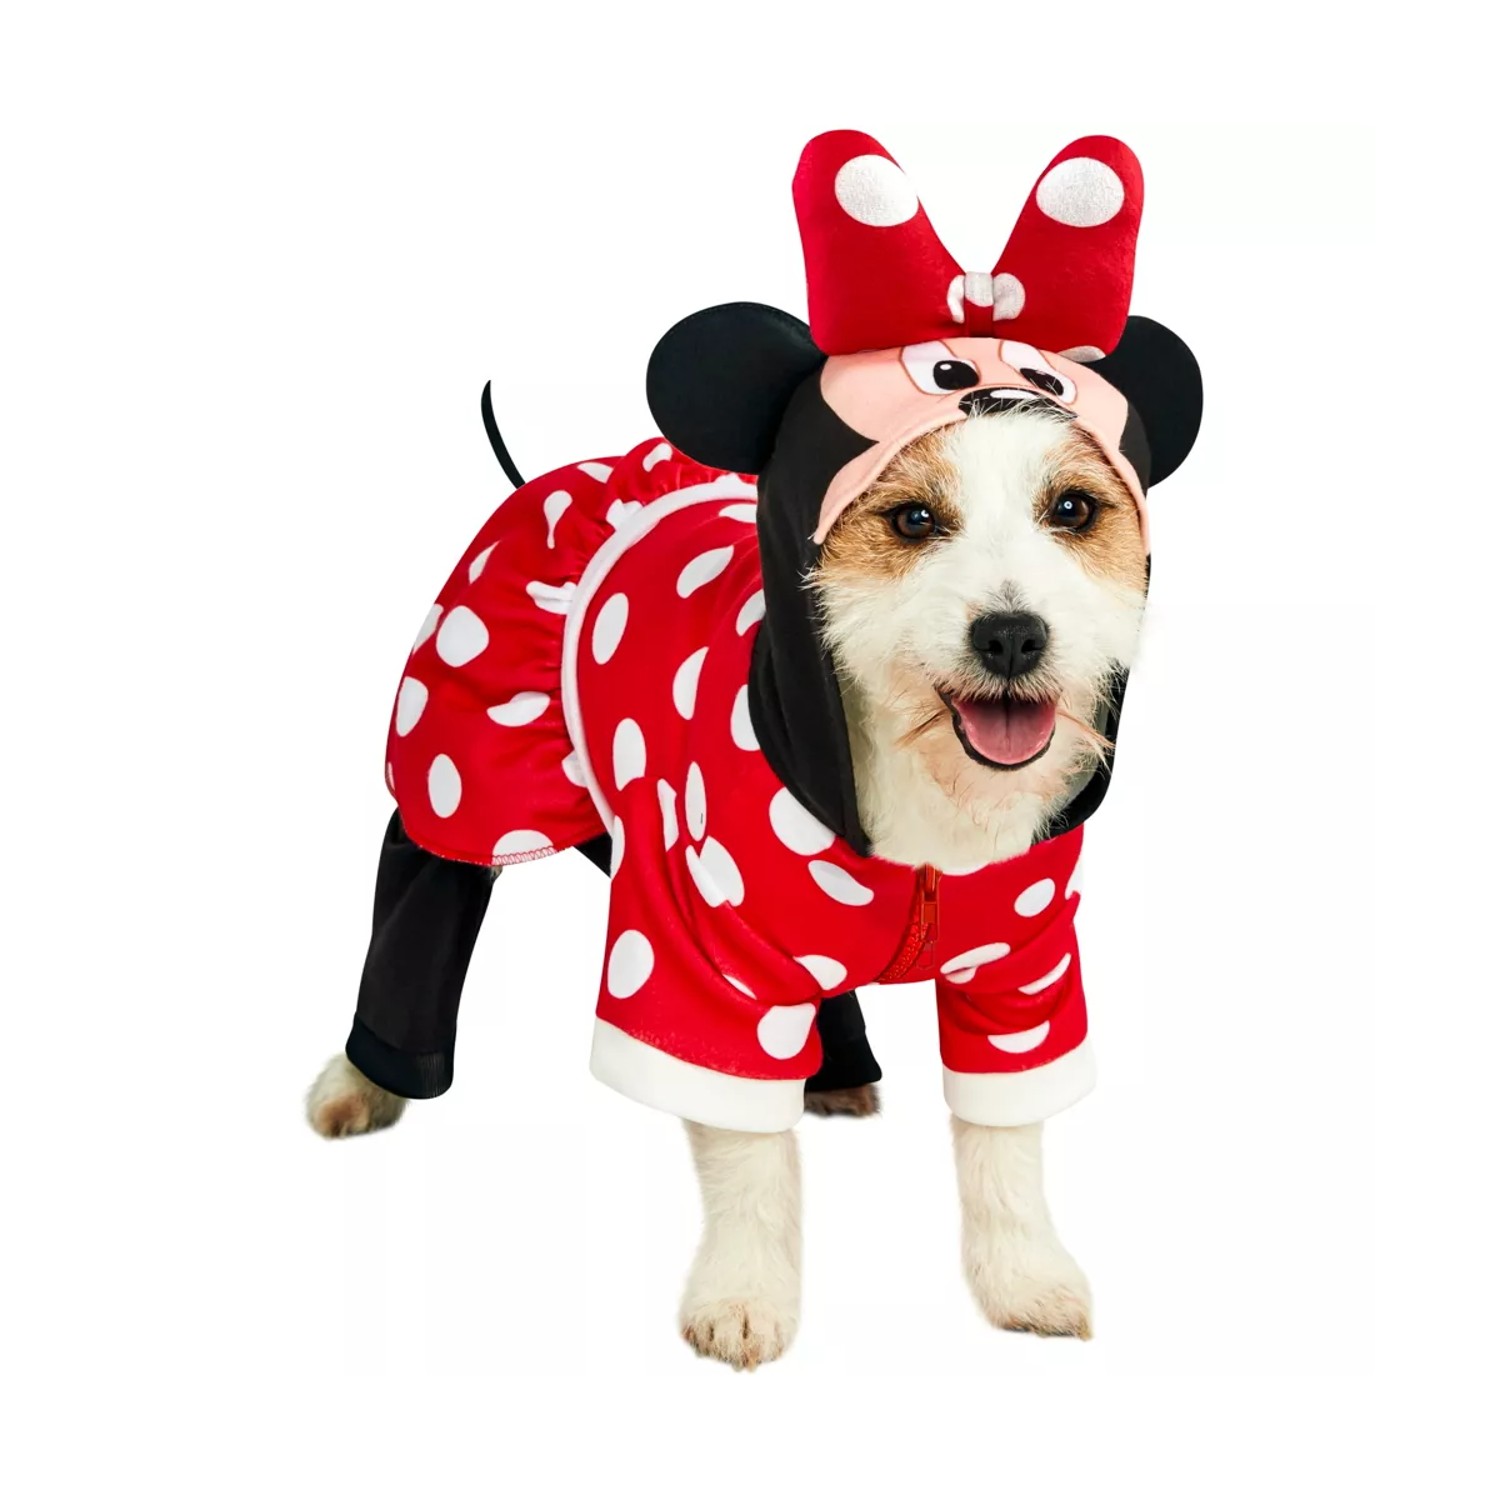 Disney Minnie Mouse Dog Costume with Hood by Rubies